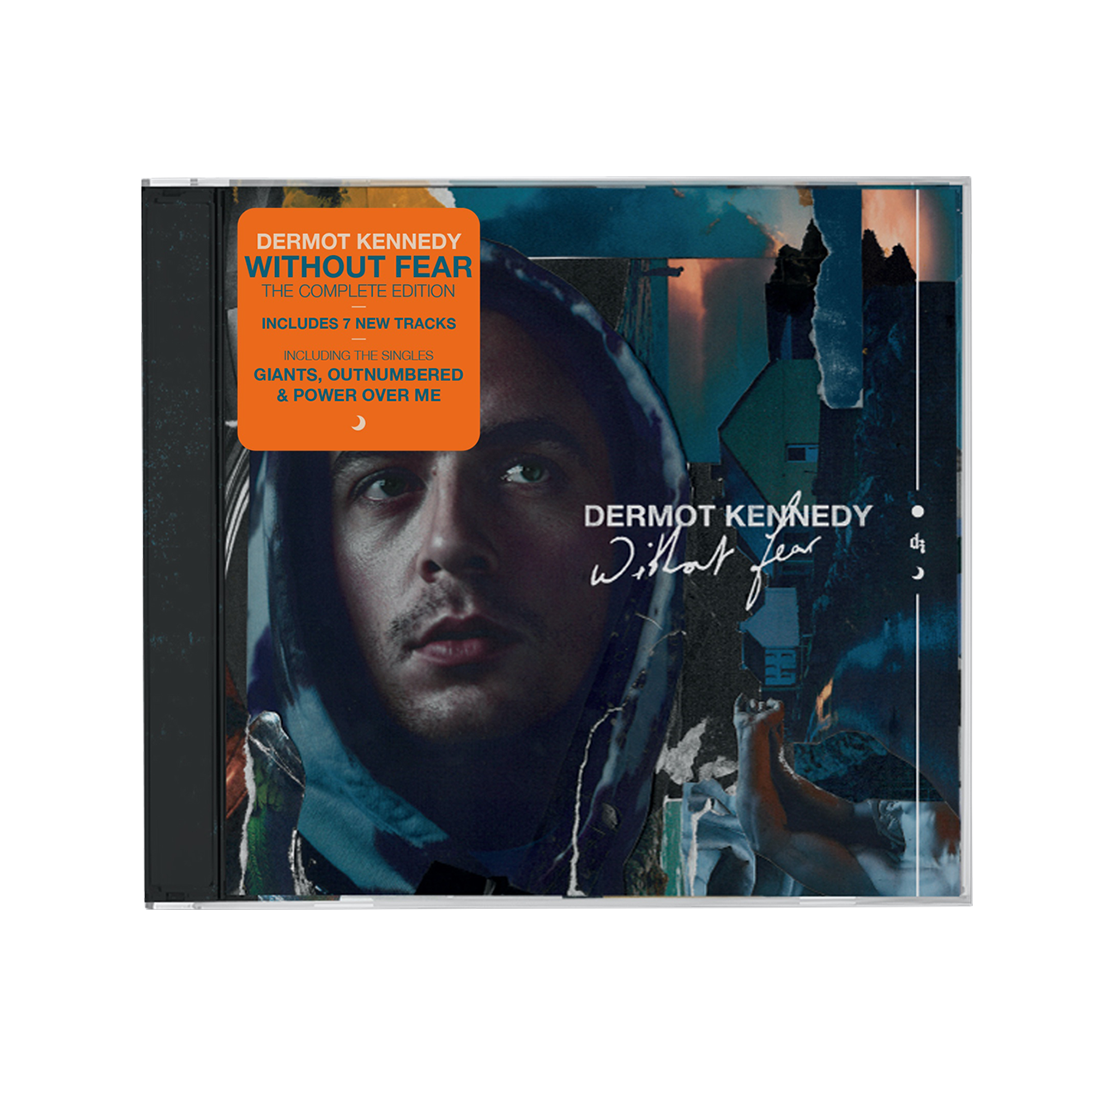 Dermot Kennedy - Without Fear: The Complete Edition CD